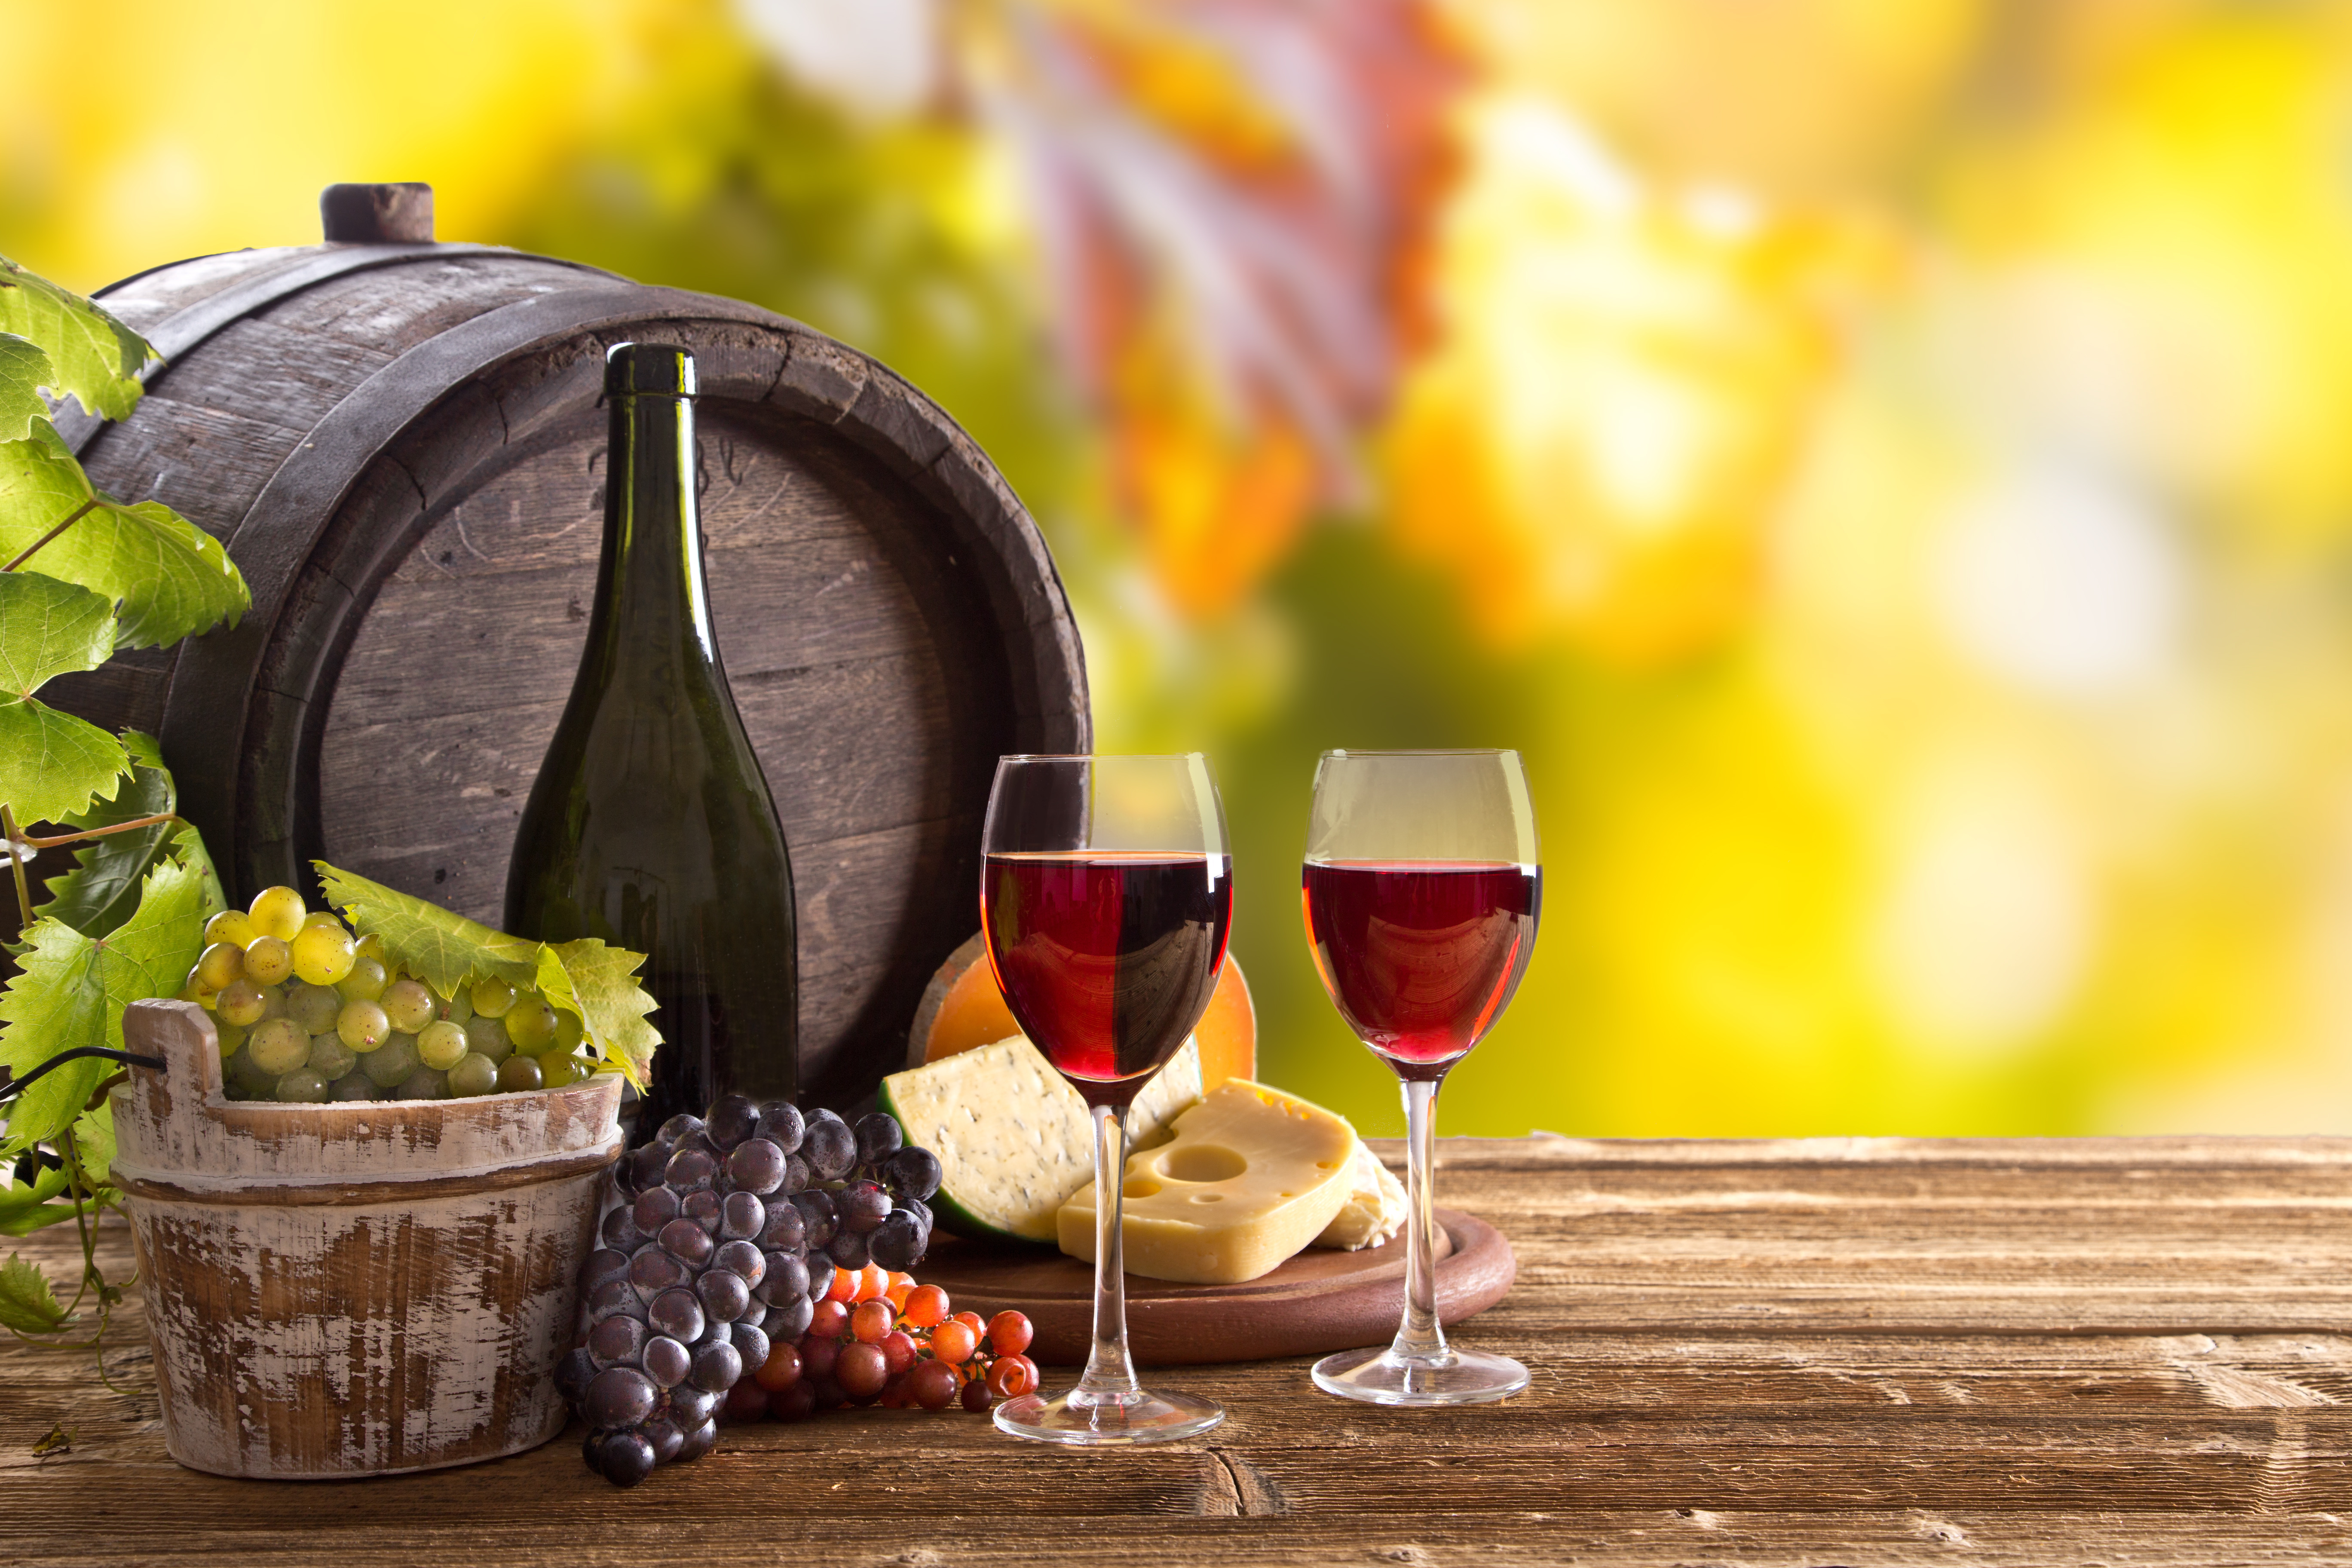 wine, photography, still life, barrel, cheese, glass, grapes